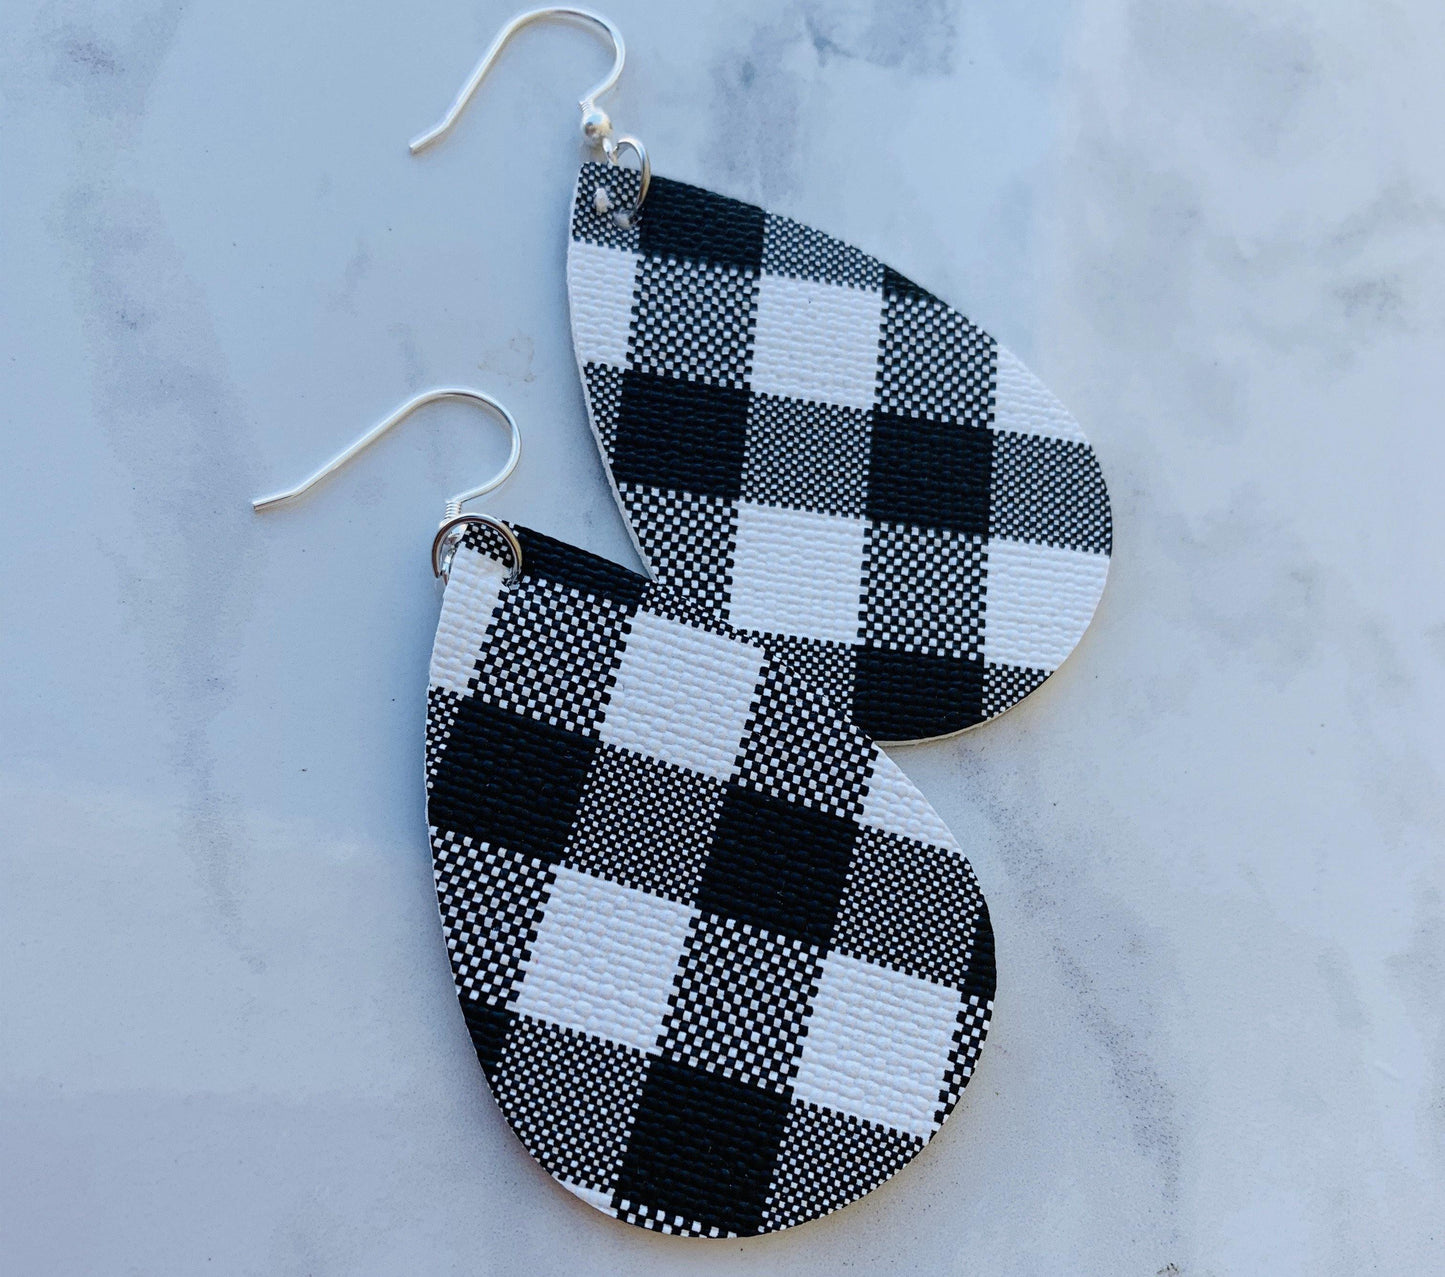 Earrings • Buffalo plaid • White/black • Red/black • Wholesale orders welcome. - Stacy's Pink Martini Boutique